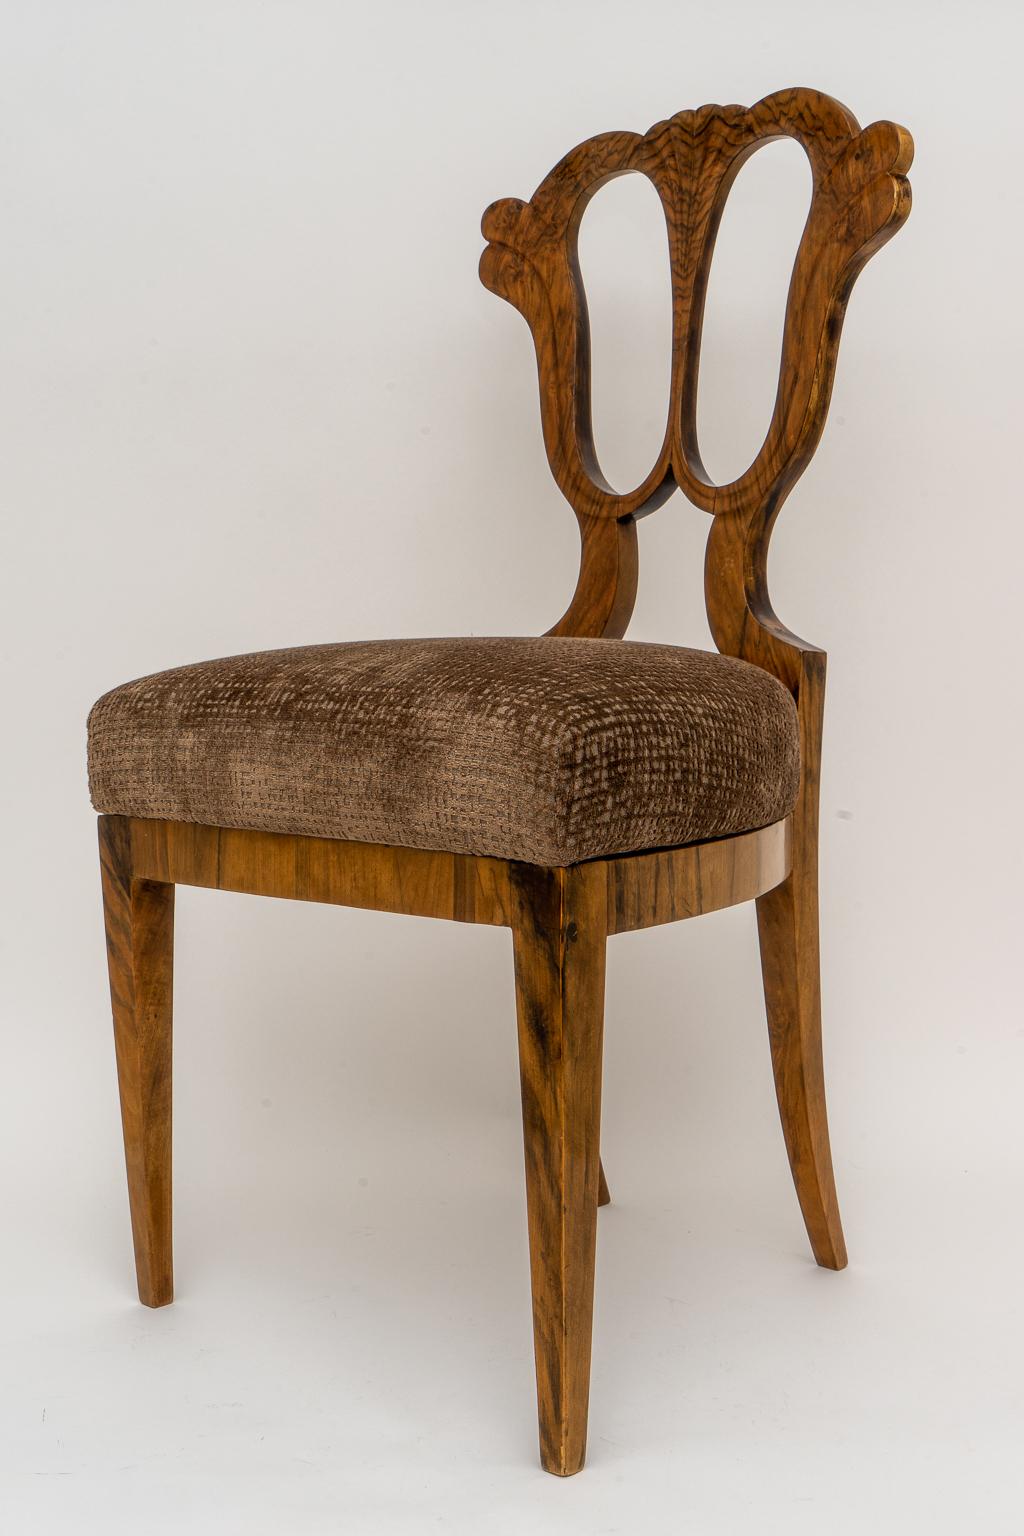 This stylish and chic Biedermeier side chair date to the early part of the 19th century and it’s the perfect scale as a desk chair or perhaps as a vanity table chair. The piece retain a label on the underside of the seat for T.Rohan and interior